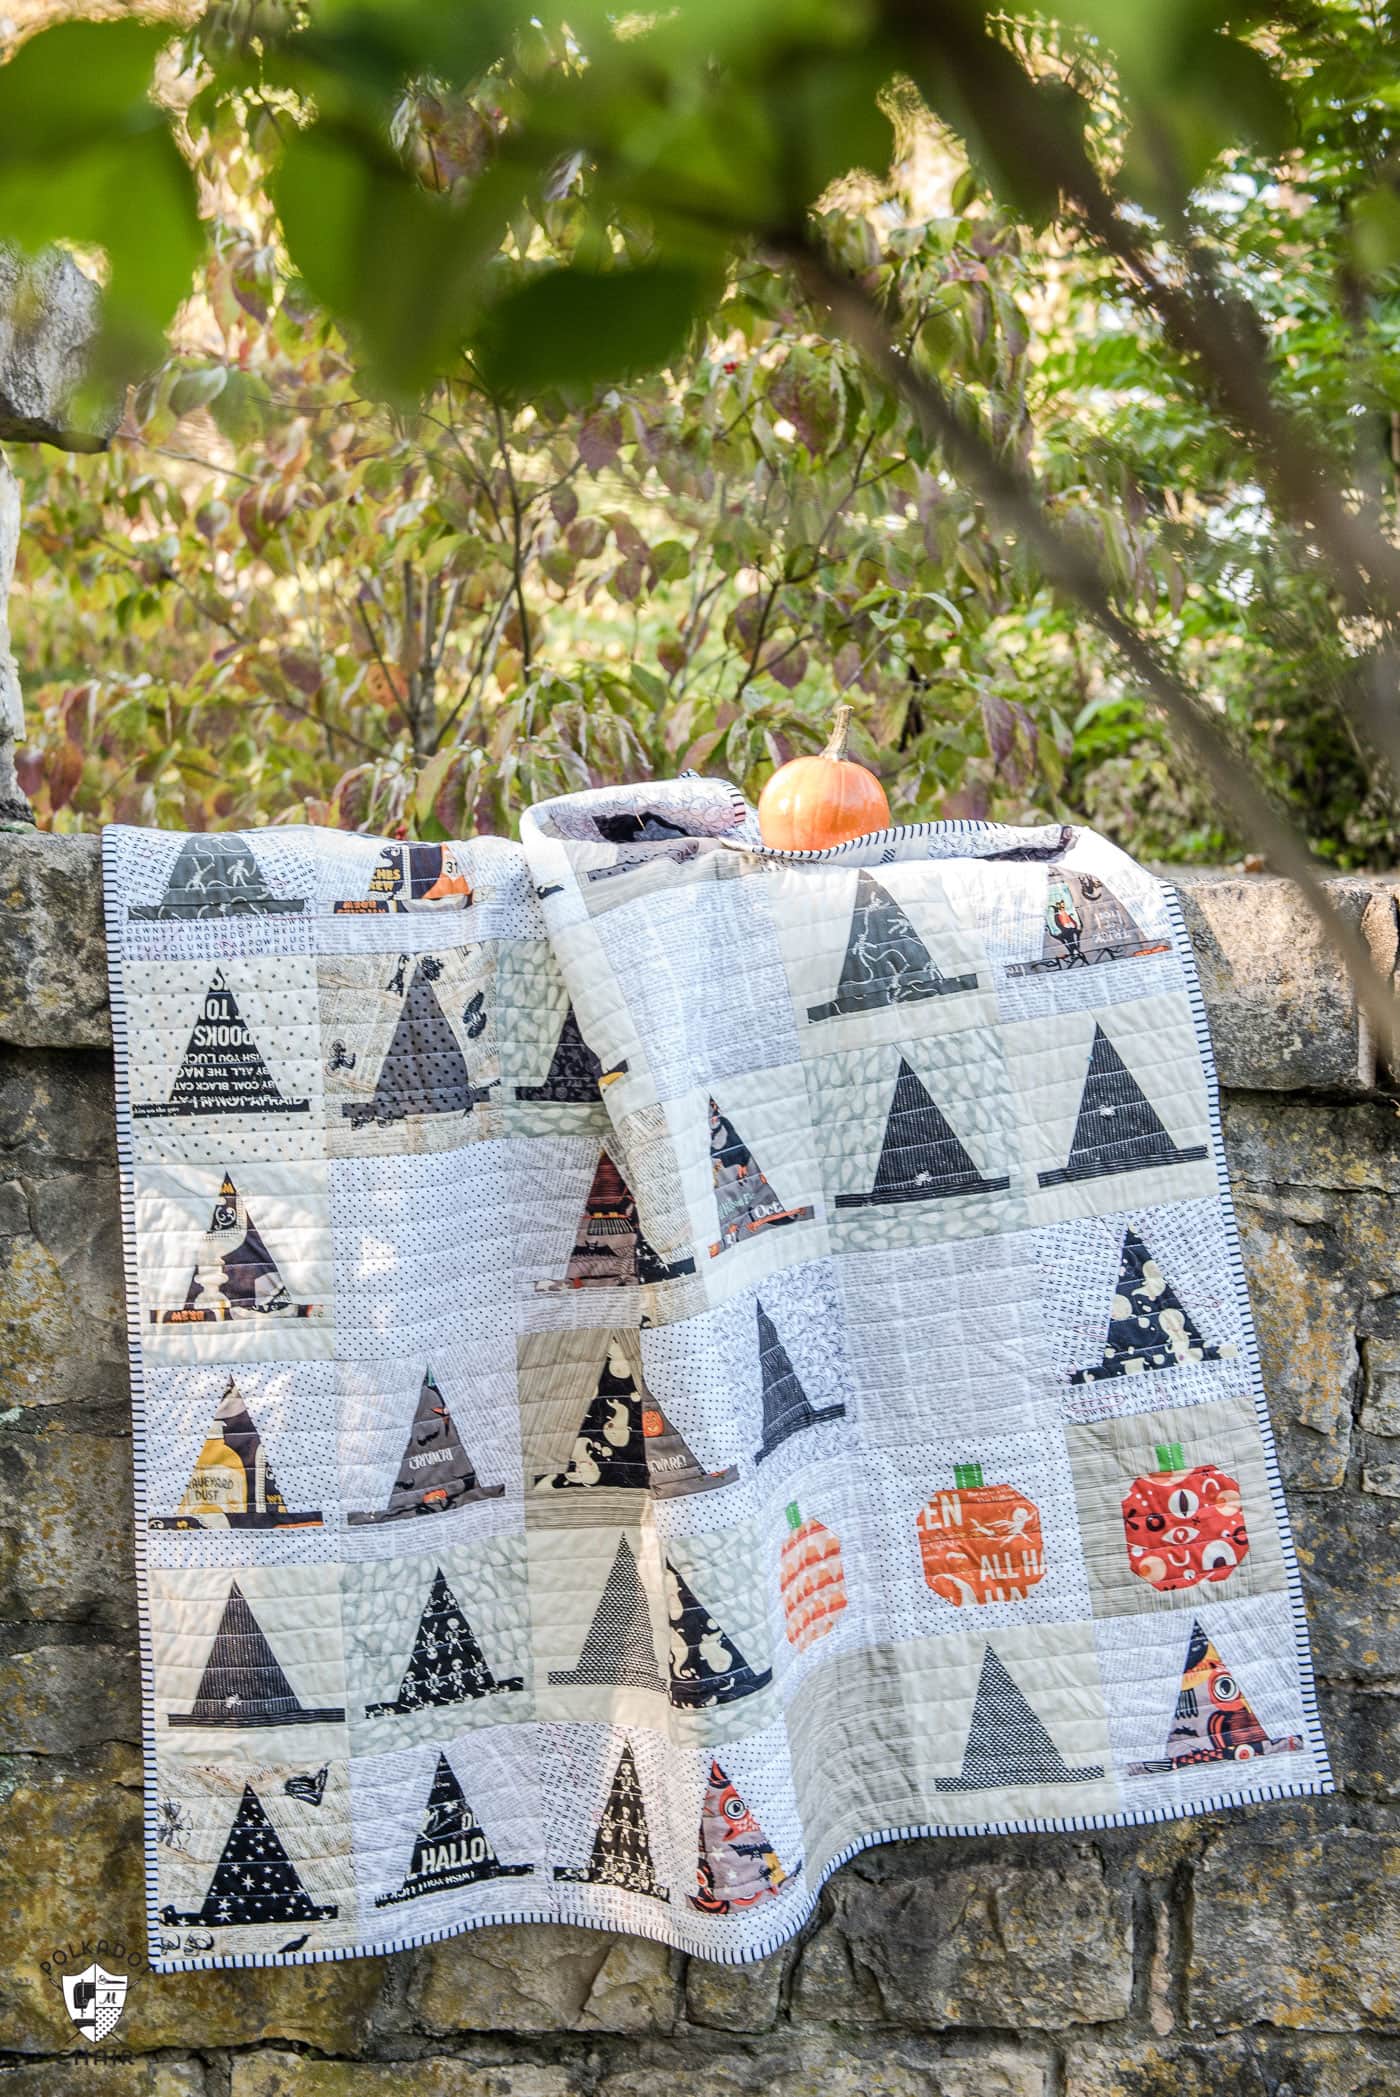 Halloween Haberdashery Quilt by Melissa Mortenson - a cute Halloween Quilt witch hat pattern hanging on a stone wall with pumpkin